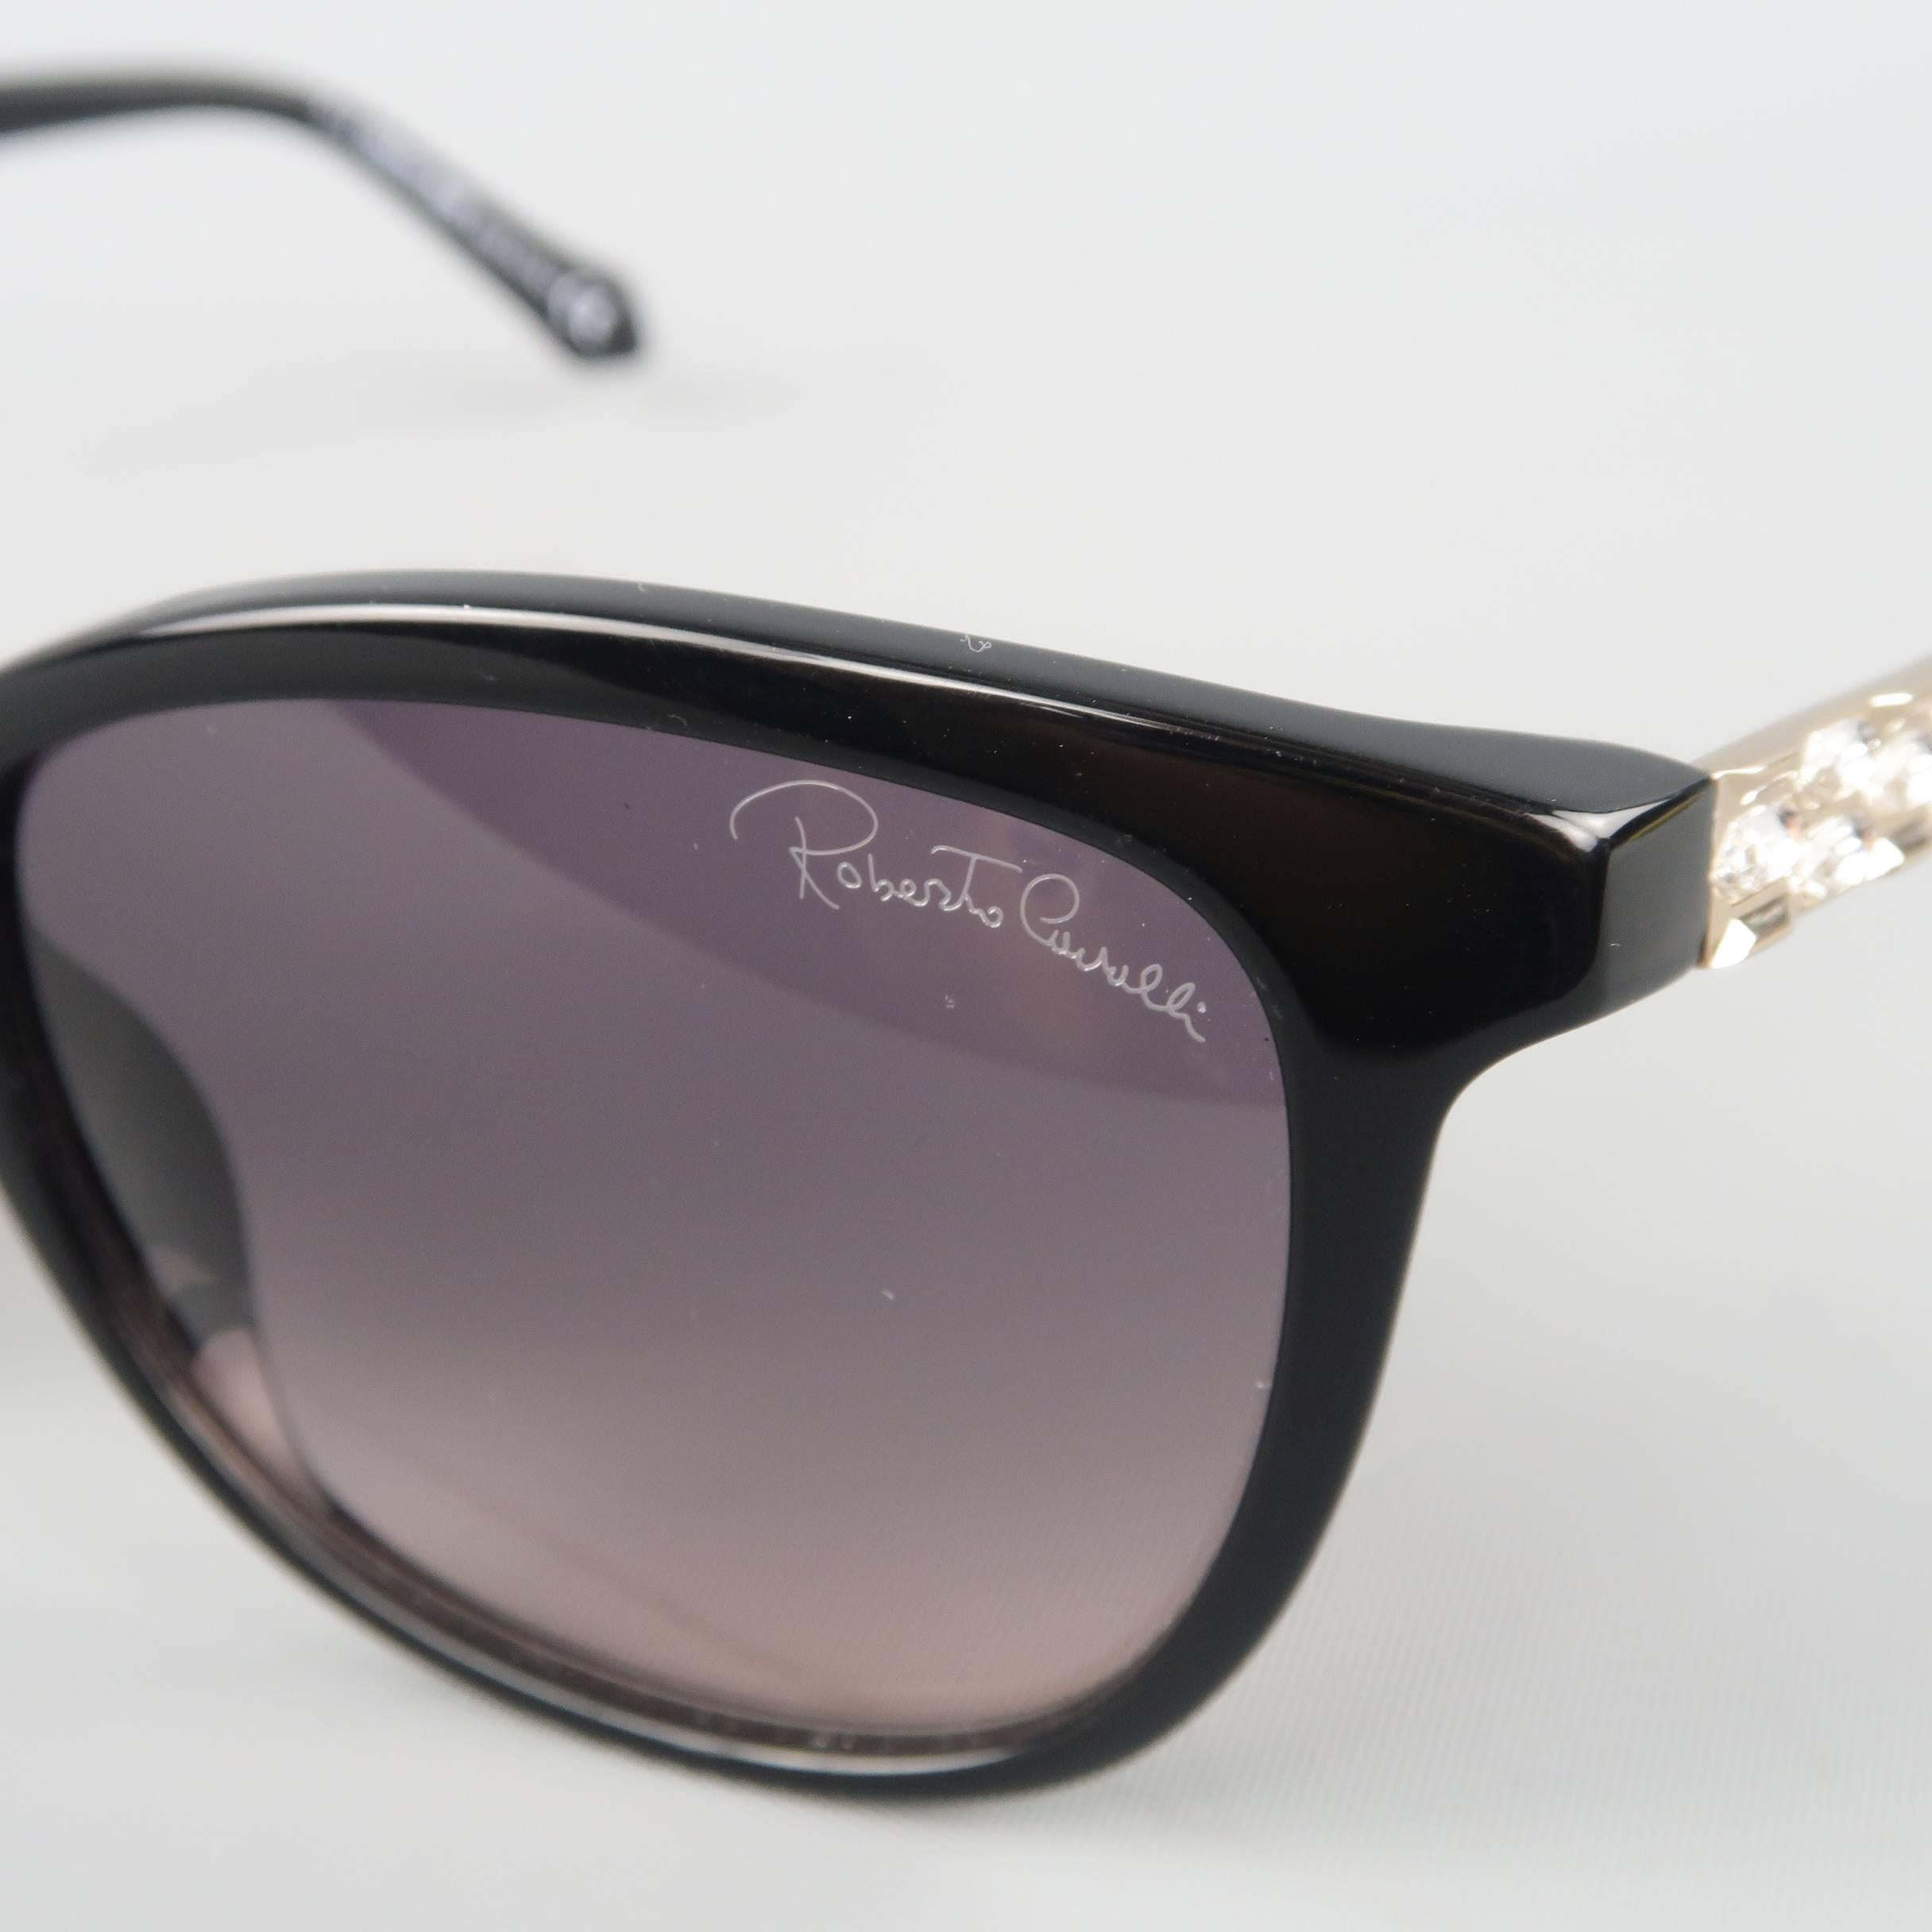 ROBERTO CAVALLI wayfarer sunglasses come in black glossy acetate with rhinestone detailed metal panel arms. Made in Italy.
 
Good Pre-Owned Condition.
Marked: Merak 904S 01B 55 17 135 *2
 
Measurements:
 
Length: 14.5 cm.
Height: 5.25 cm.